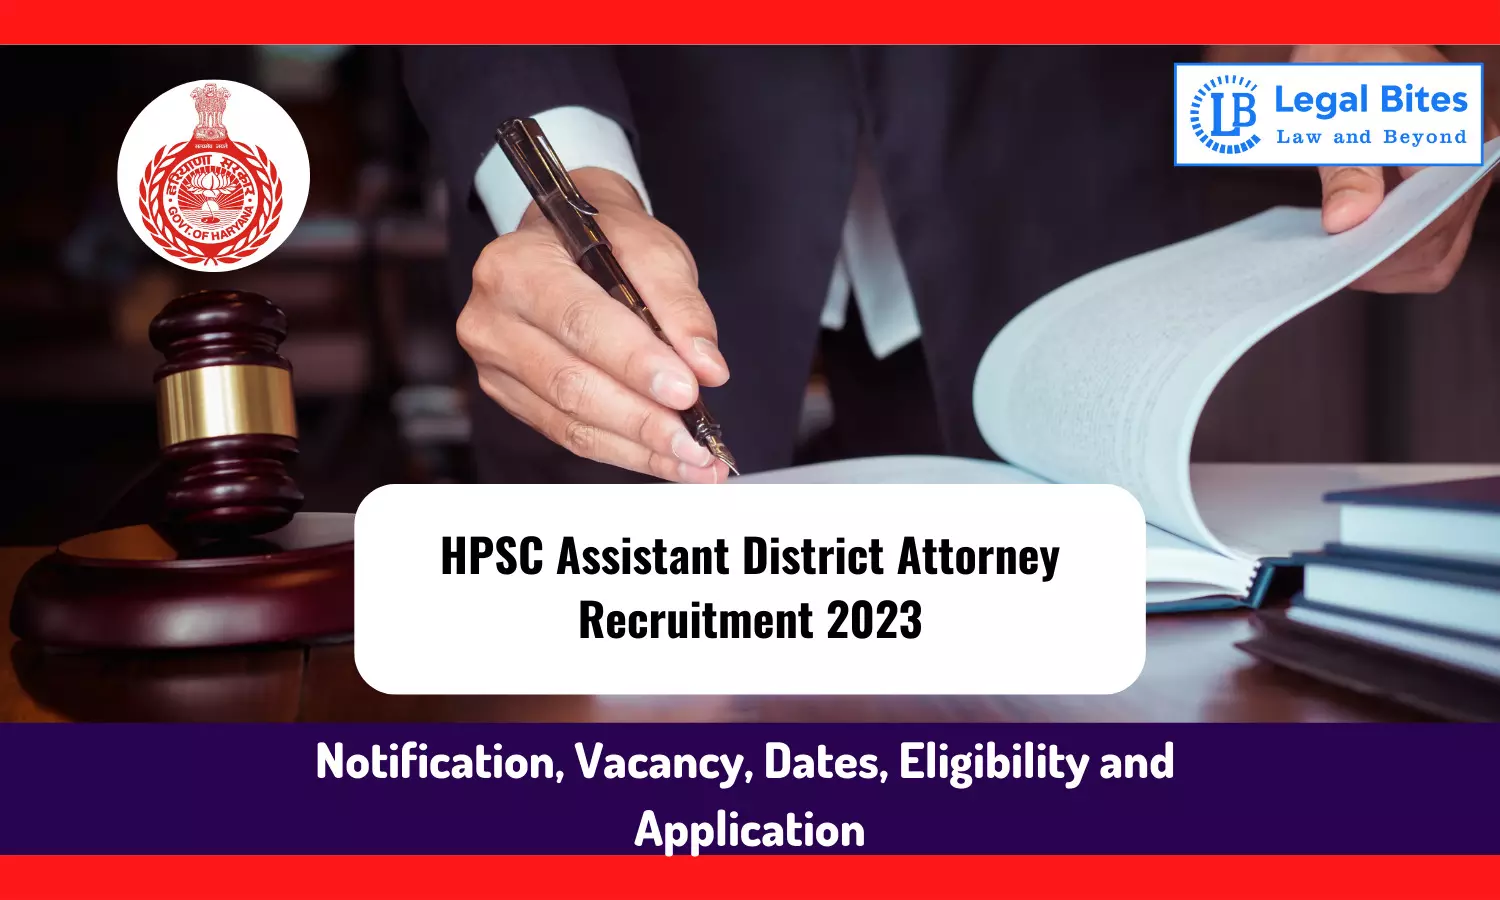 HPSC Assistant District Attorney Recruitment 2023: Notification, Vacancy, Dates, Eligibility and Application